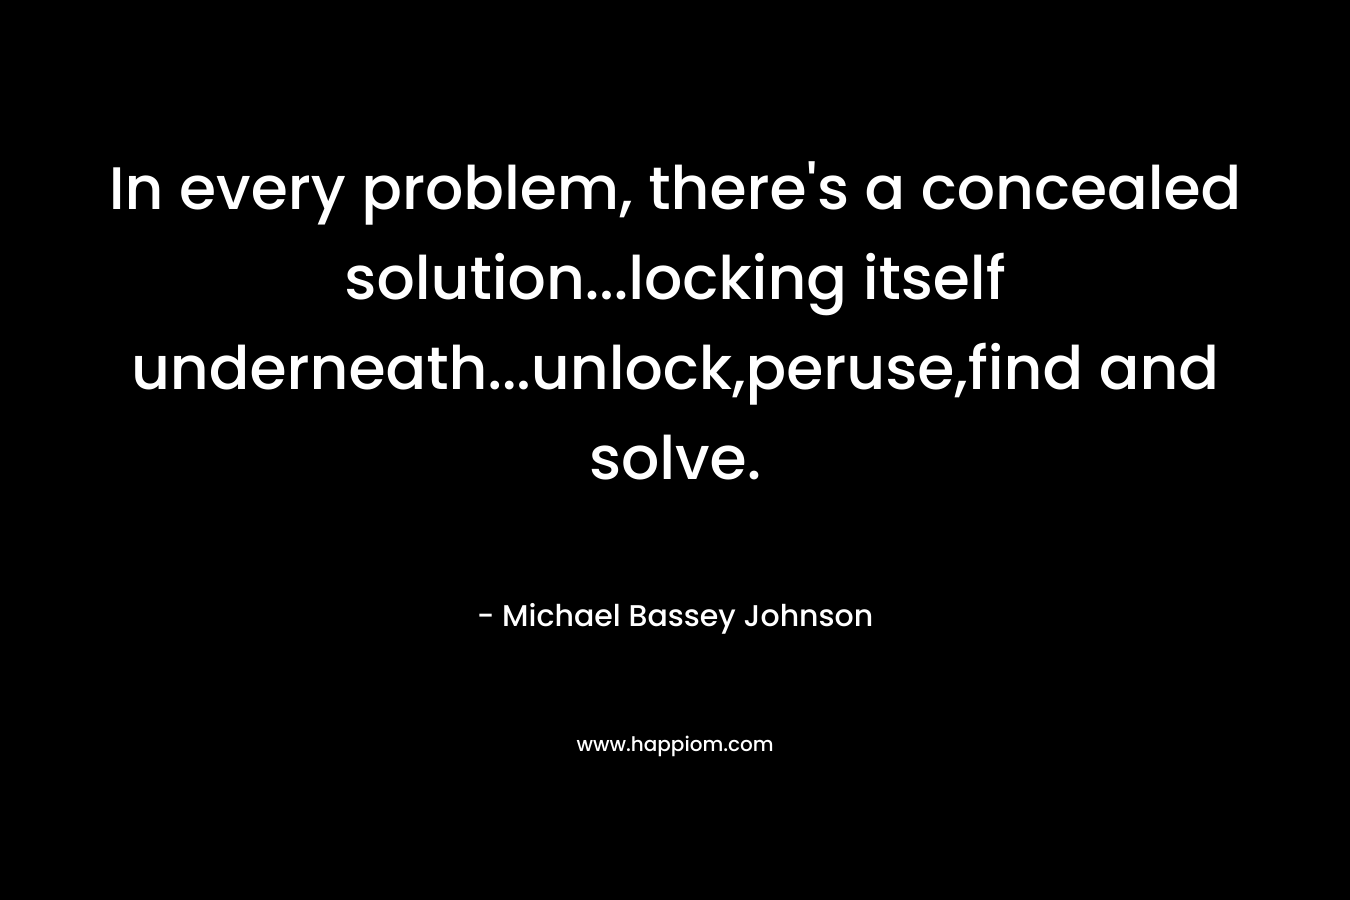 In every problem, there’s a concealed solution…locking itself underneath…unlock,peruse,find and solve. – Michael Bassey Johnson